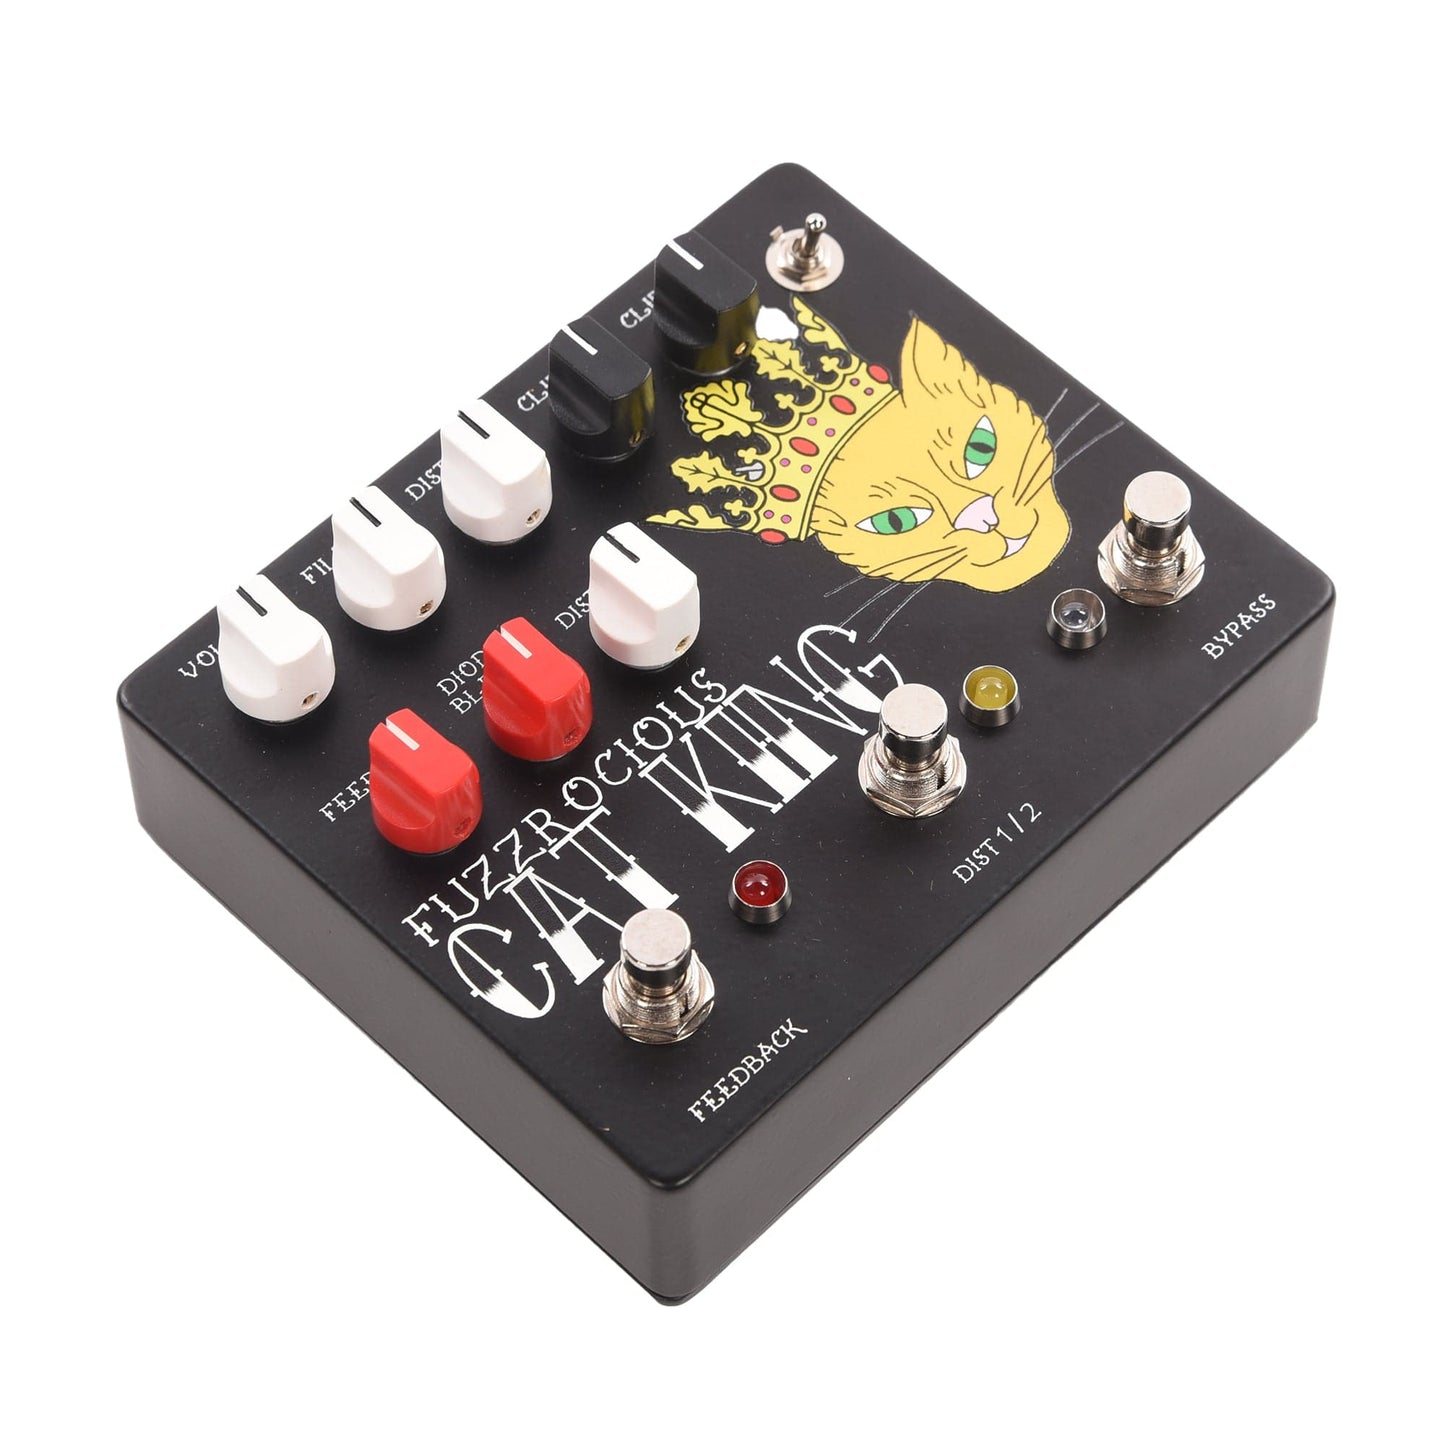 Fuzzrocious Cat King w/ Latching Feedback Mod CME Exclusive Black/Orange Effects and Pedals / Distortion